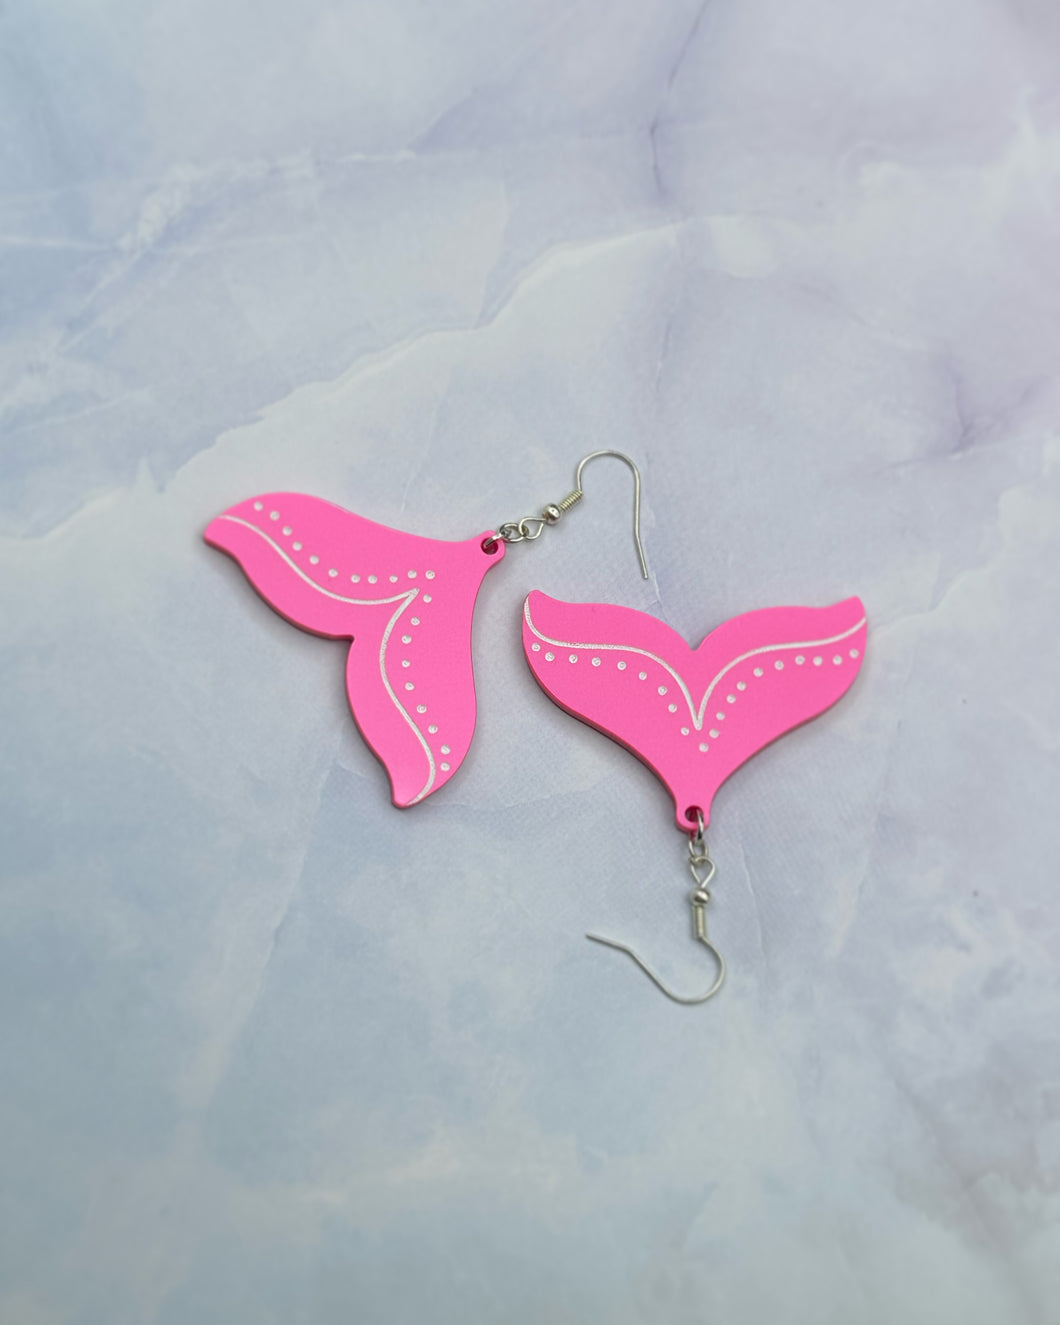 Whale tail Earrings pink Barbie inspired